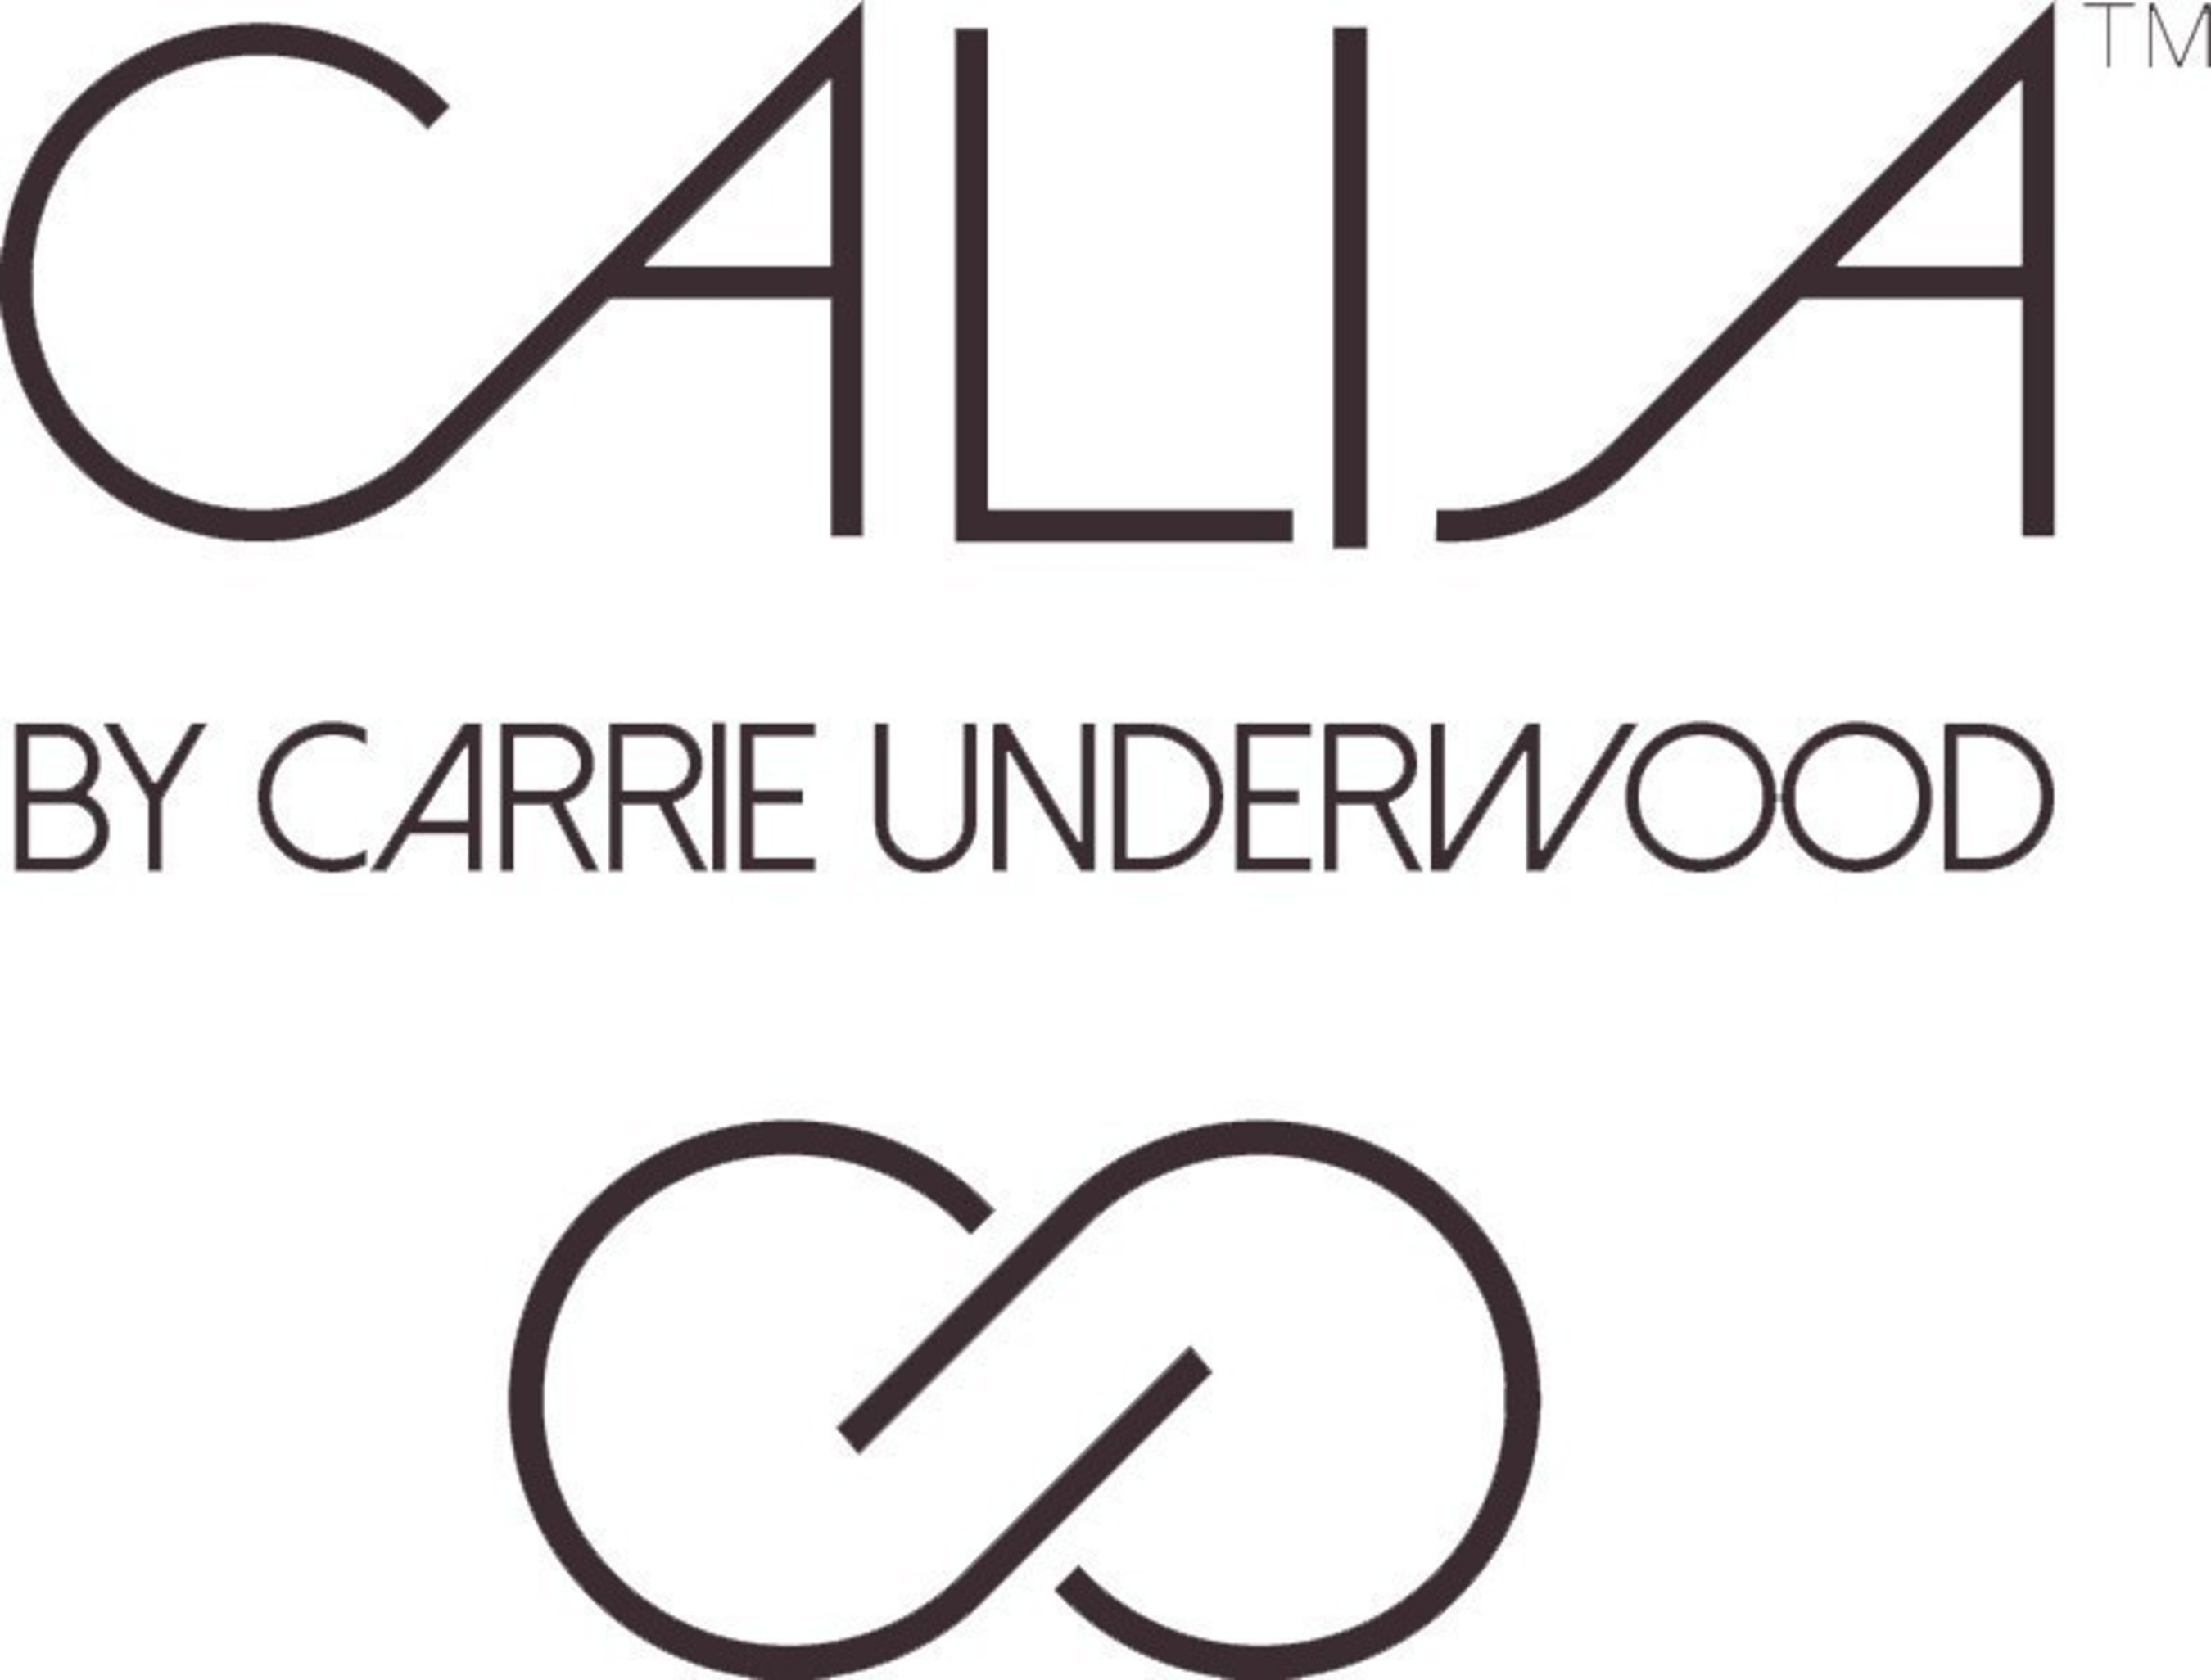 Dick's Sporting Goods - CALIA by Carrie Underwood - Stay The Path